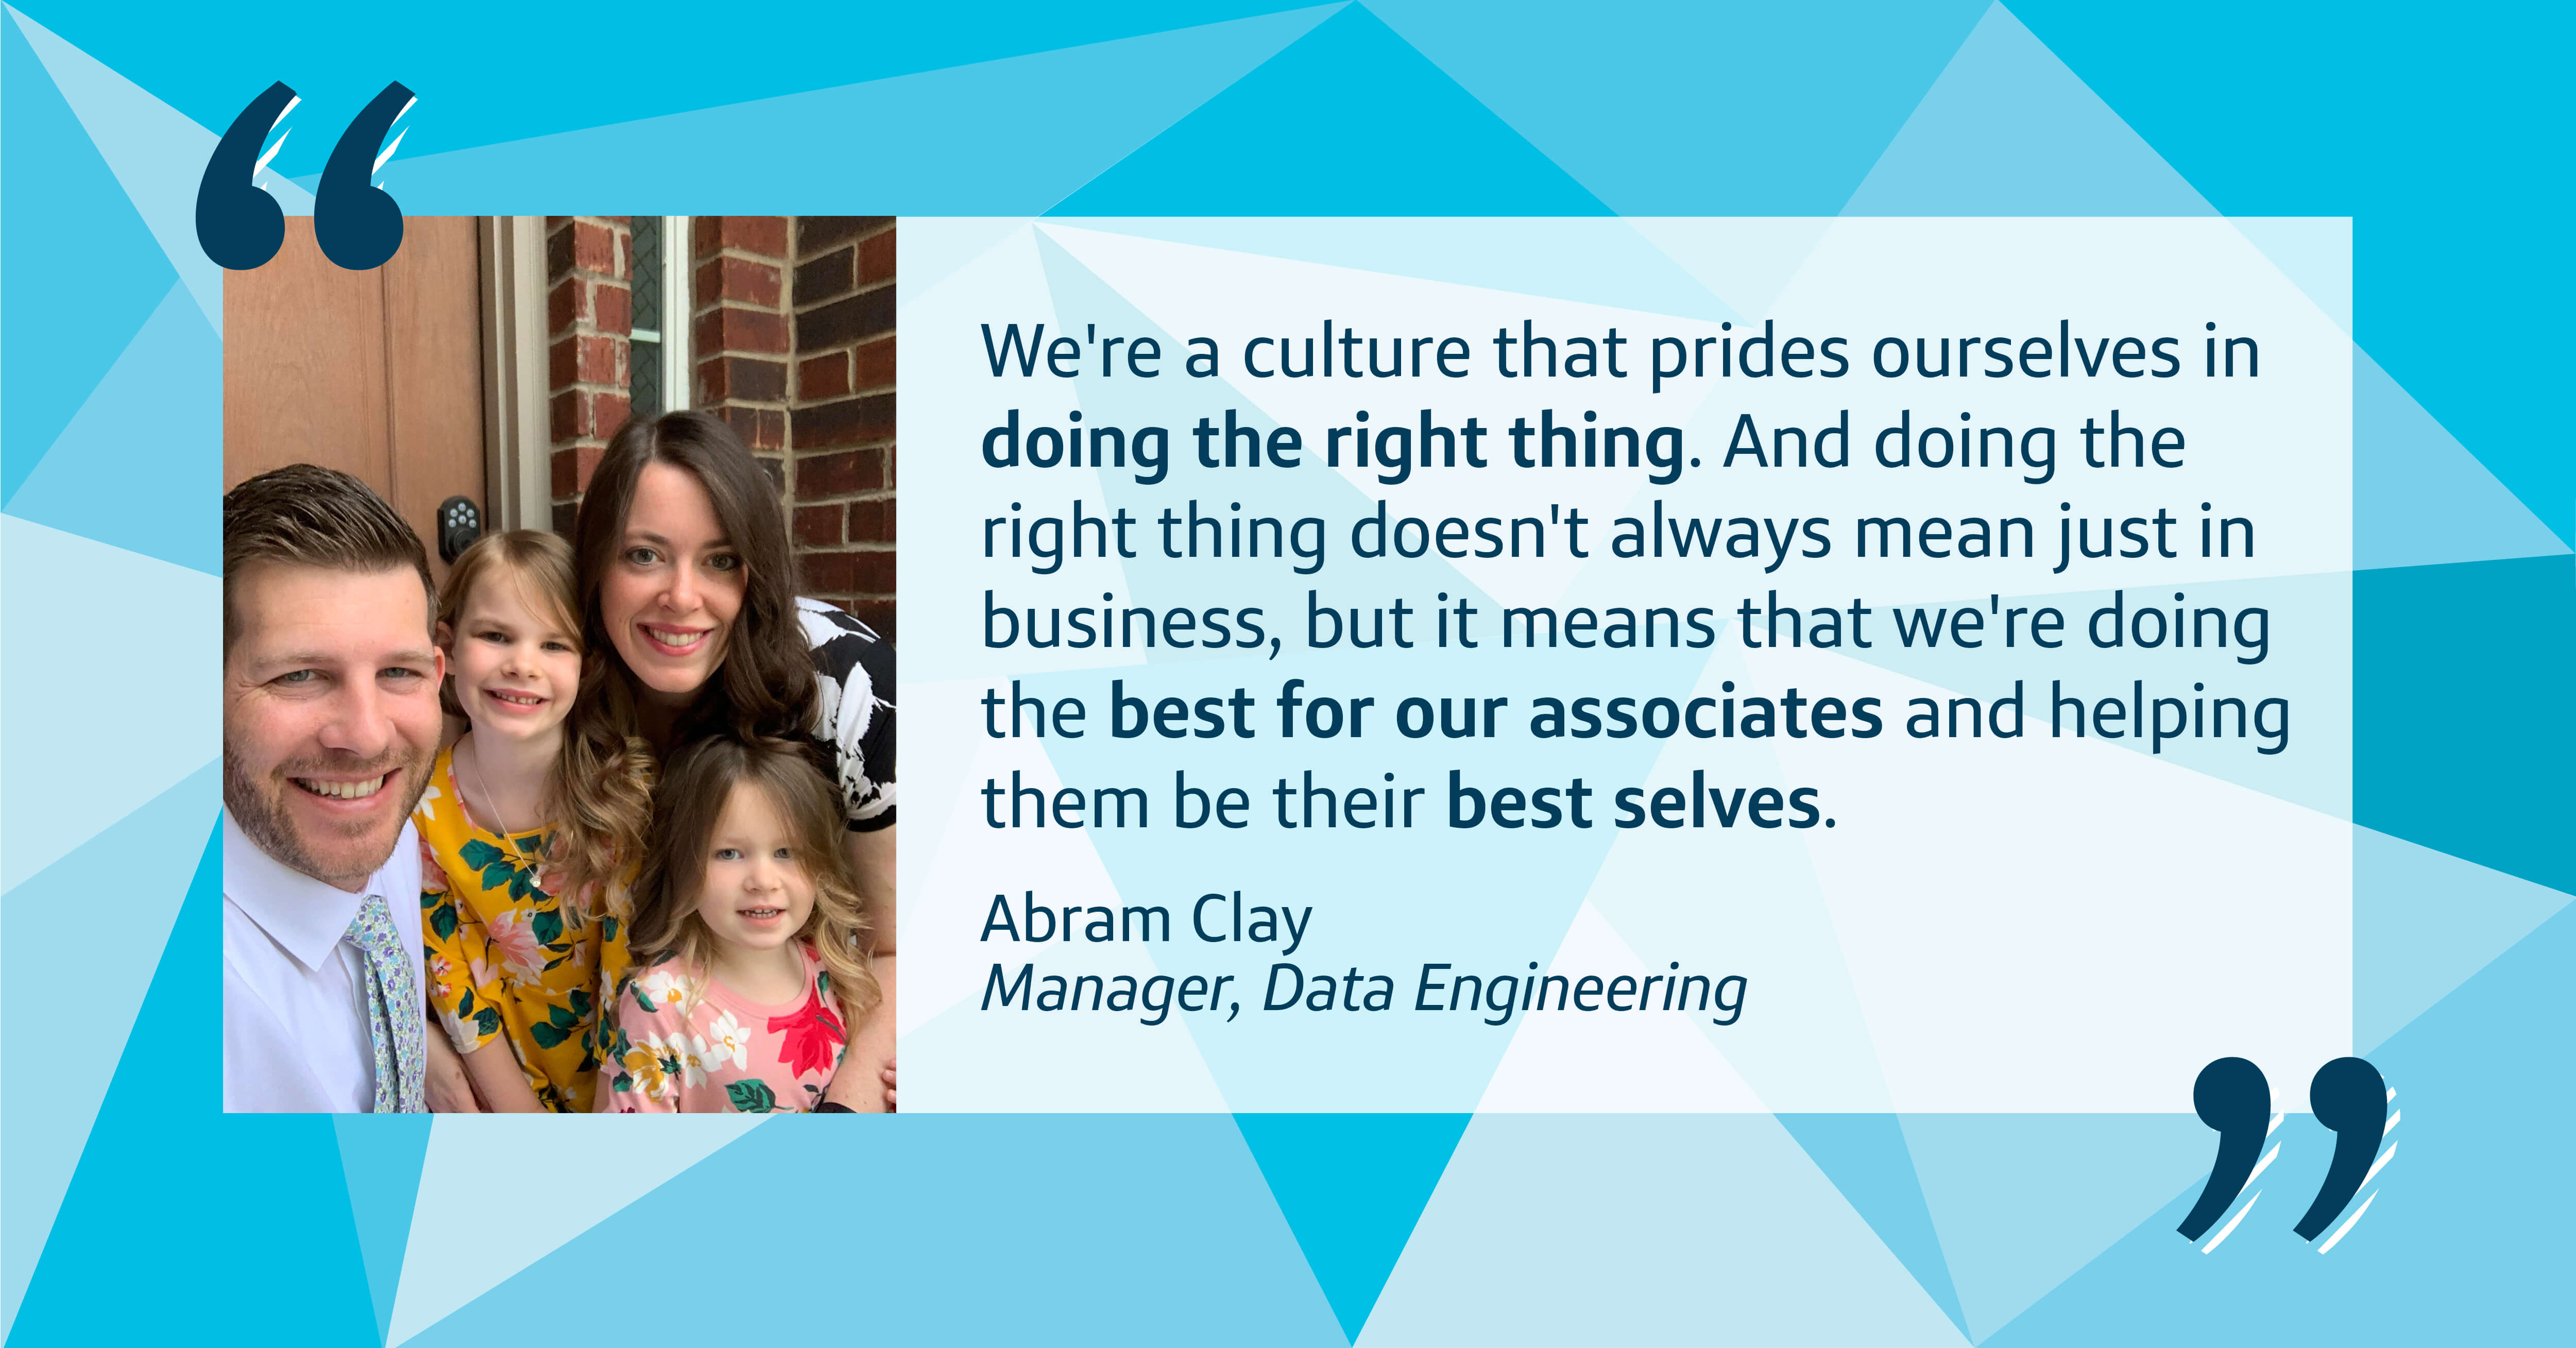 Abram, a Capital One Manager in Data Engineering, poses with his family and talks about how Capital One